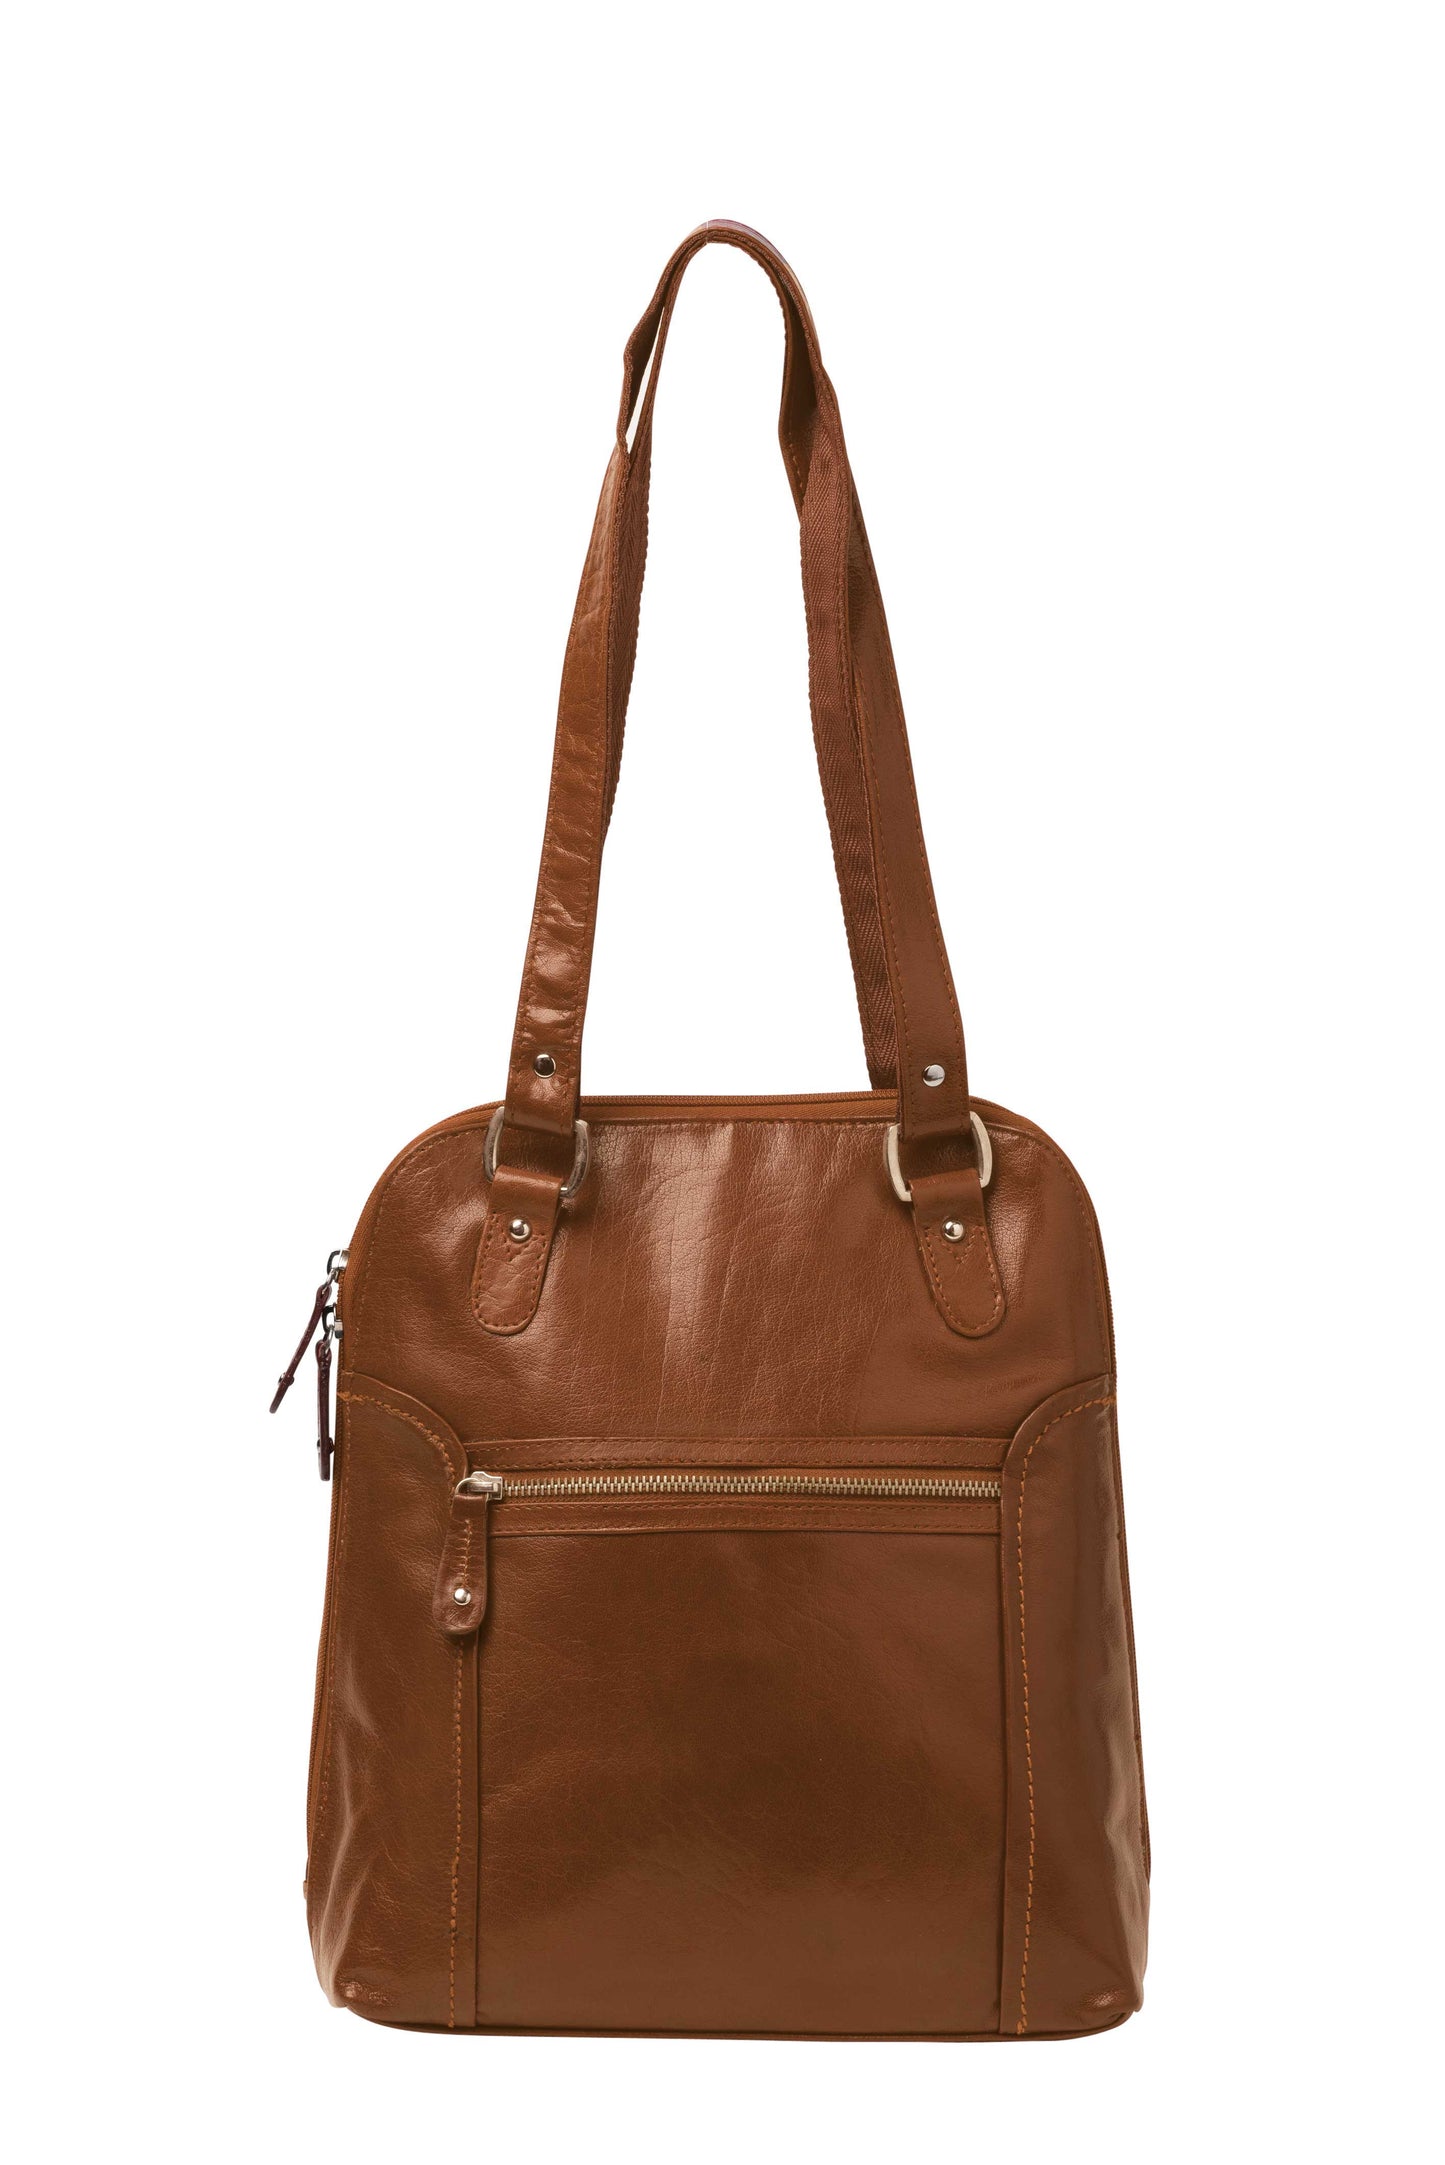 Cobb & Co Poppy Leather 2 in 1 Convertible Backpack - rainbowbags